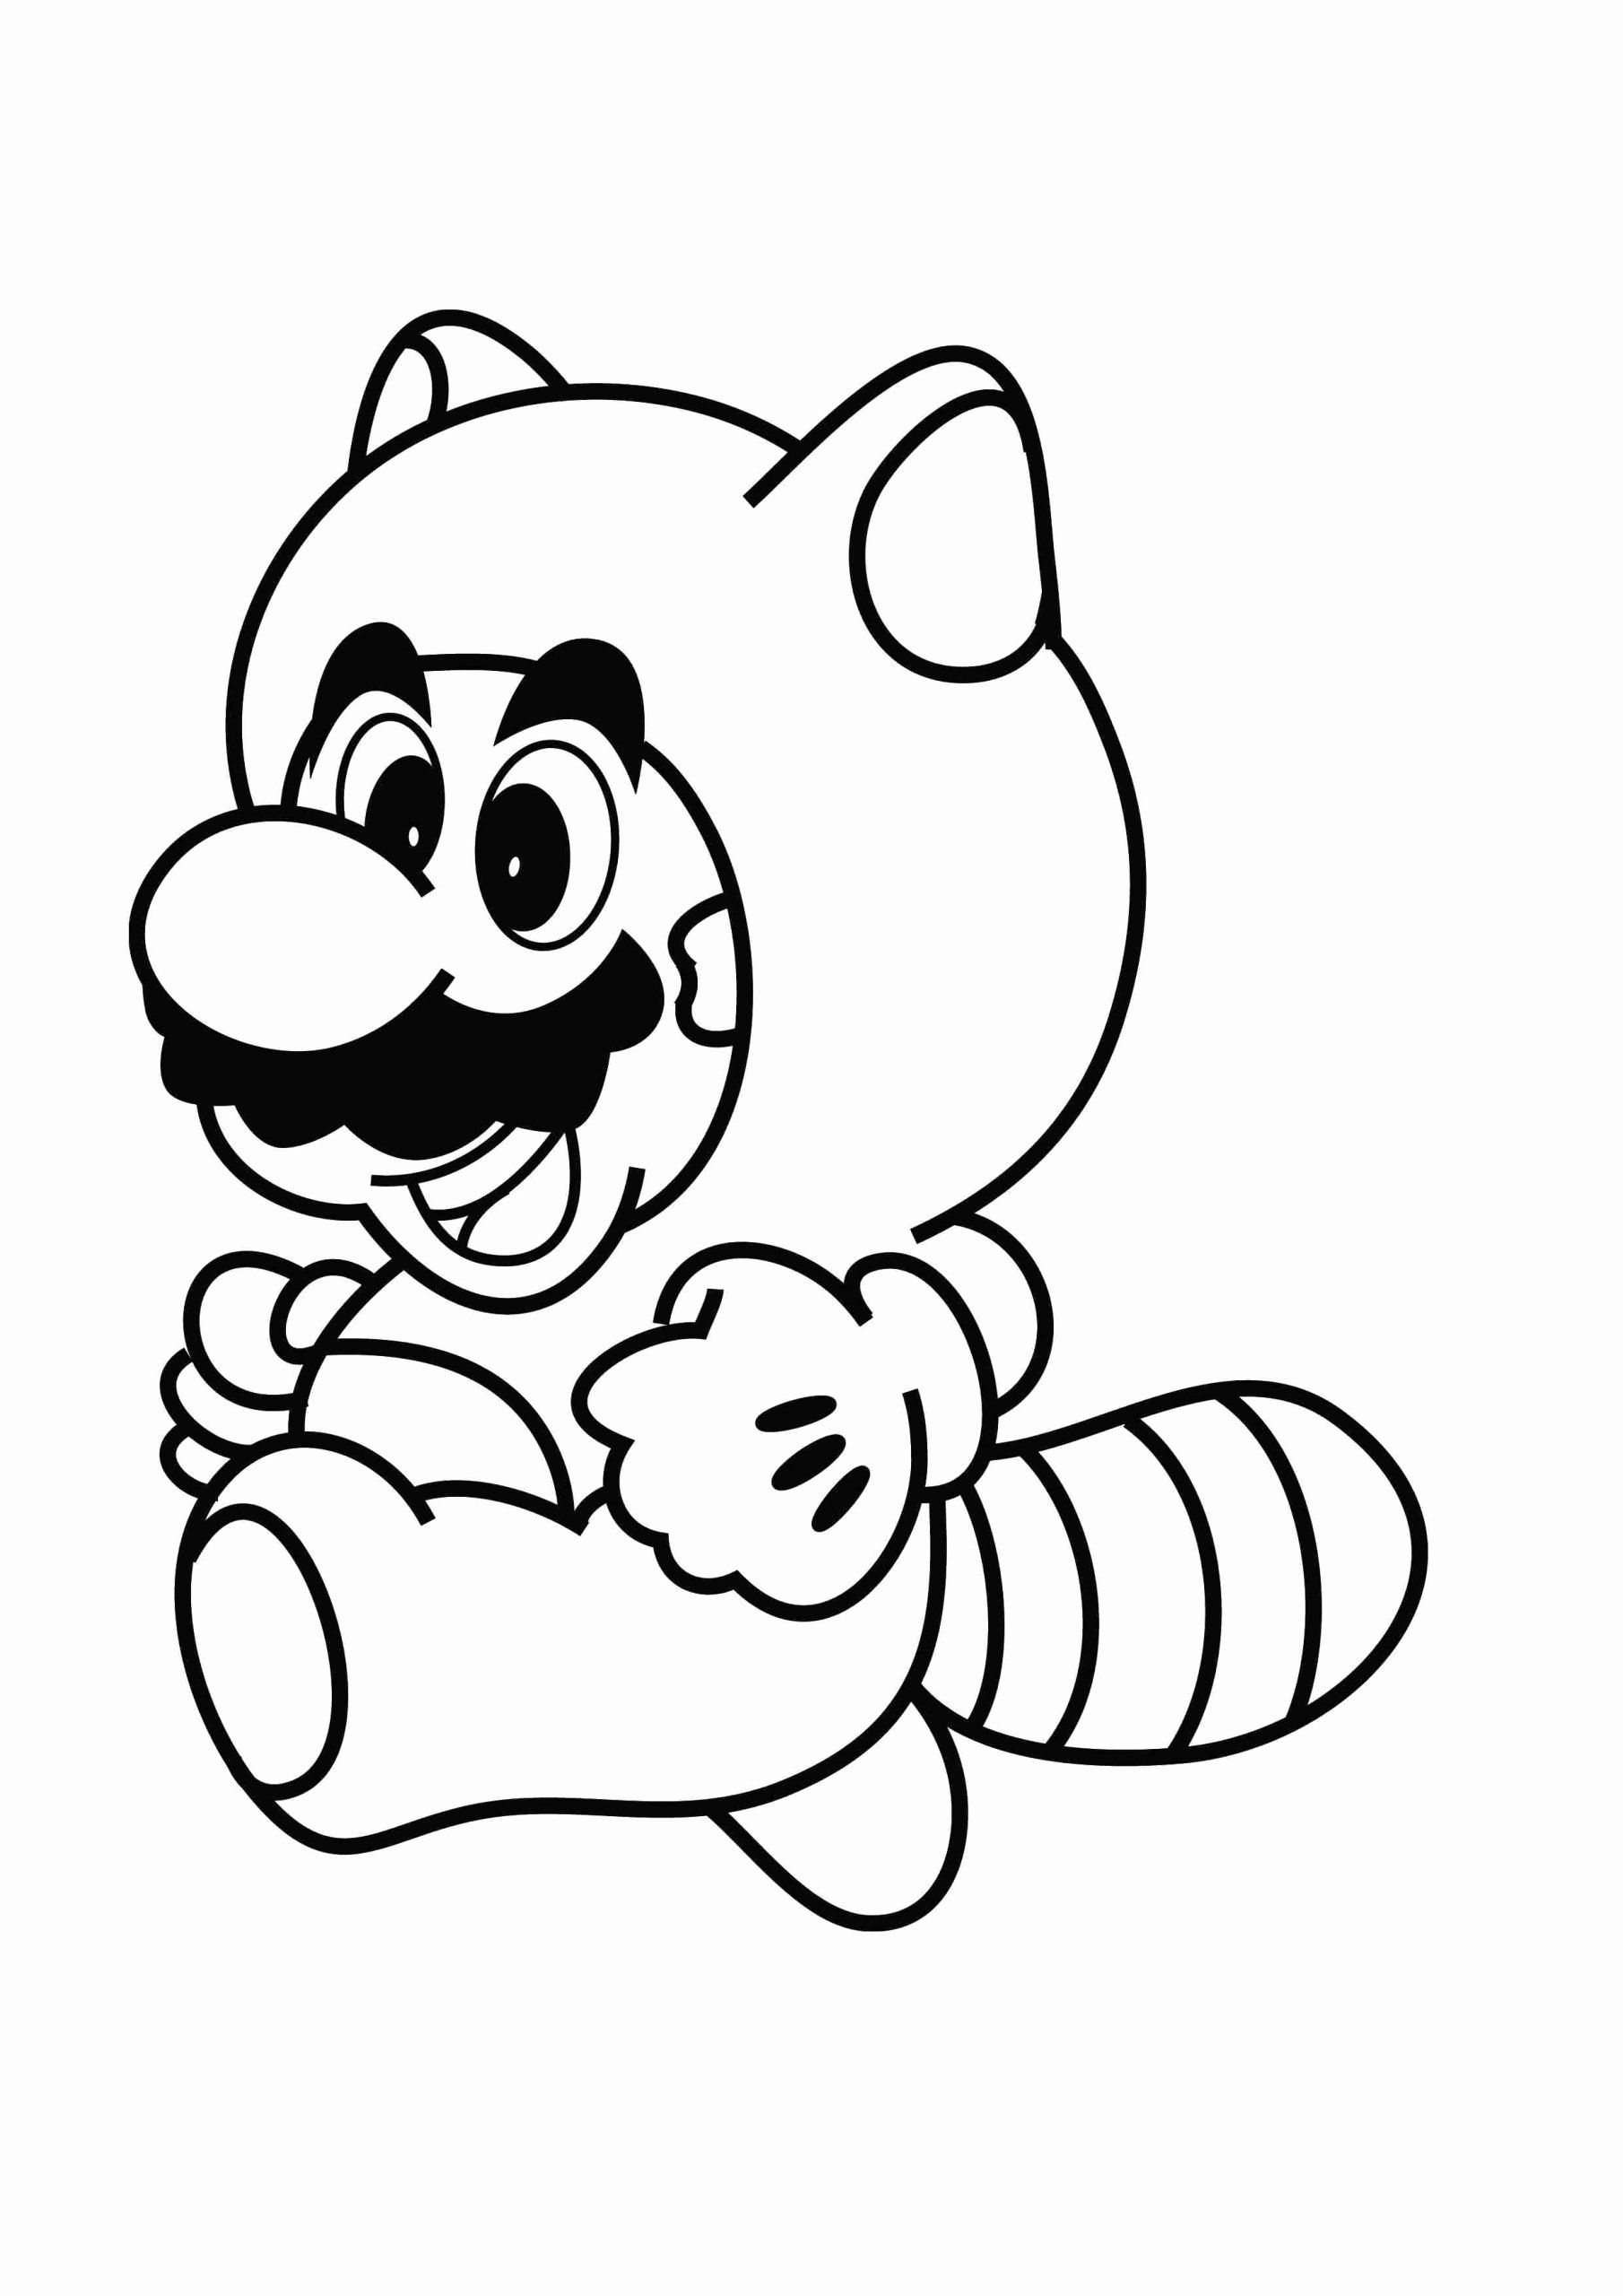 Nintendo Switch Coloring Pages - Coloring Home